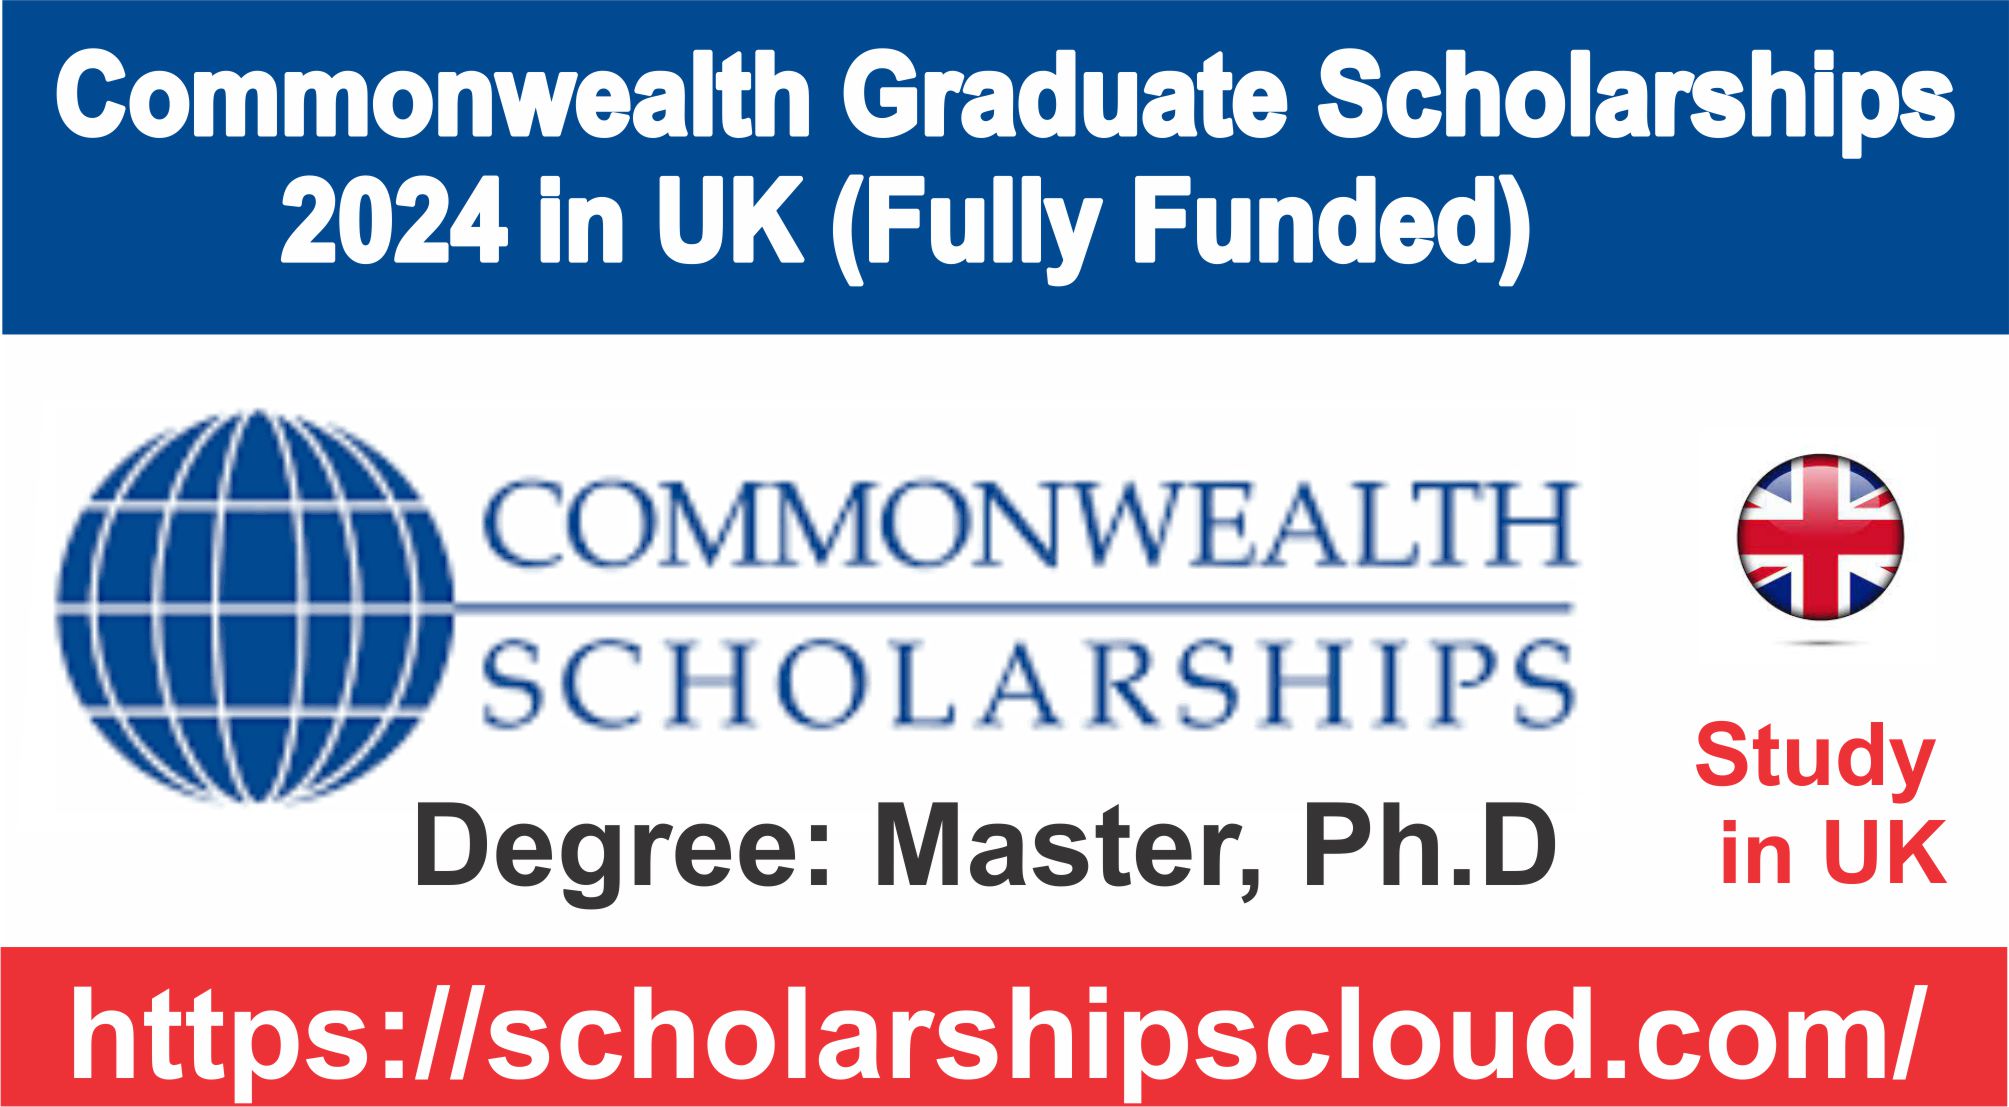 Commonwealth Graduate Scholarships 2024 in UK (Fully Funded)